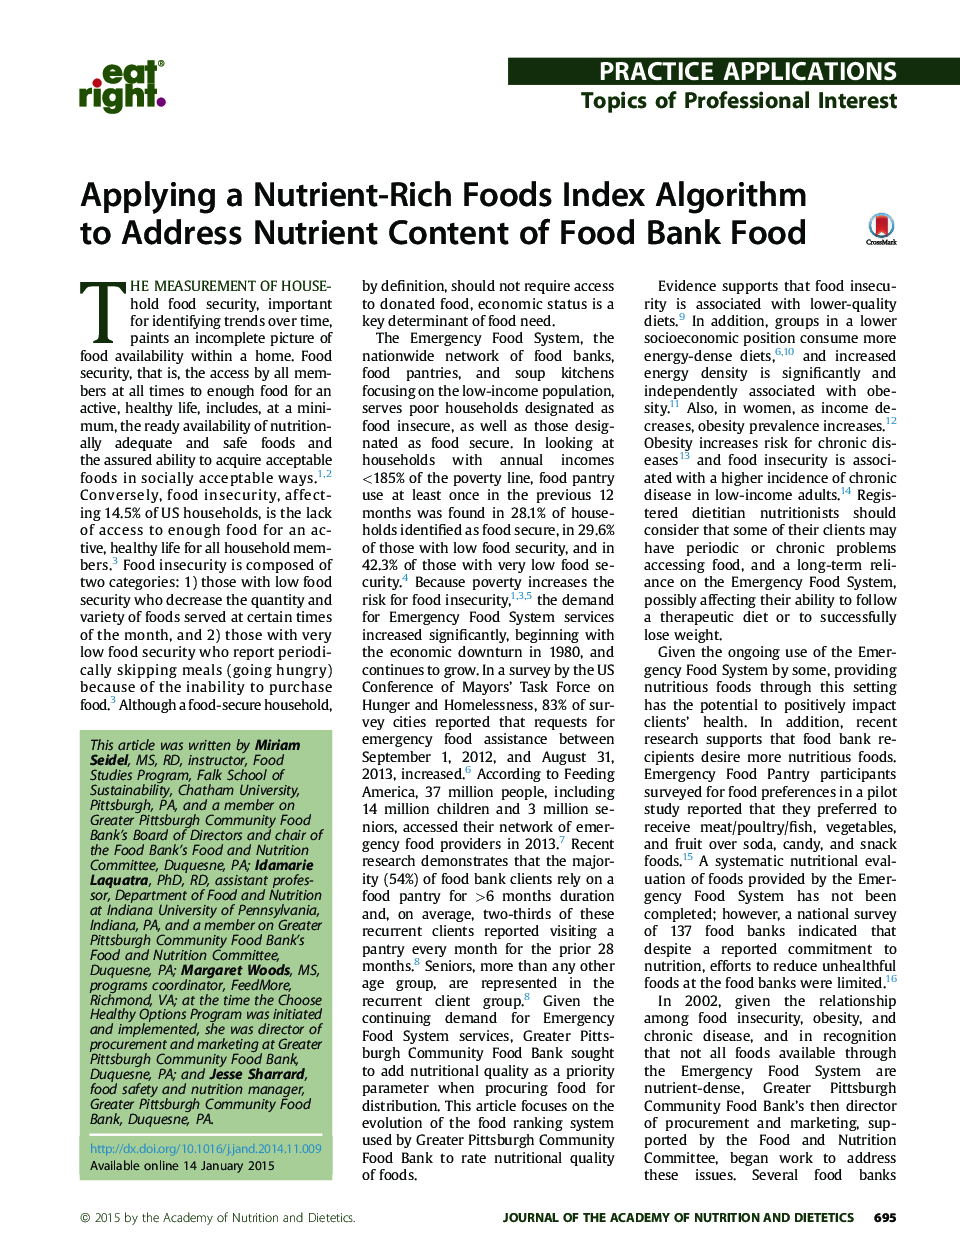 Applying a Nutrient-Rich Foods Index Algorithm to Address Nutrient Content of Food Bank Food